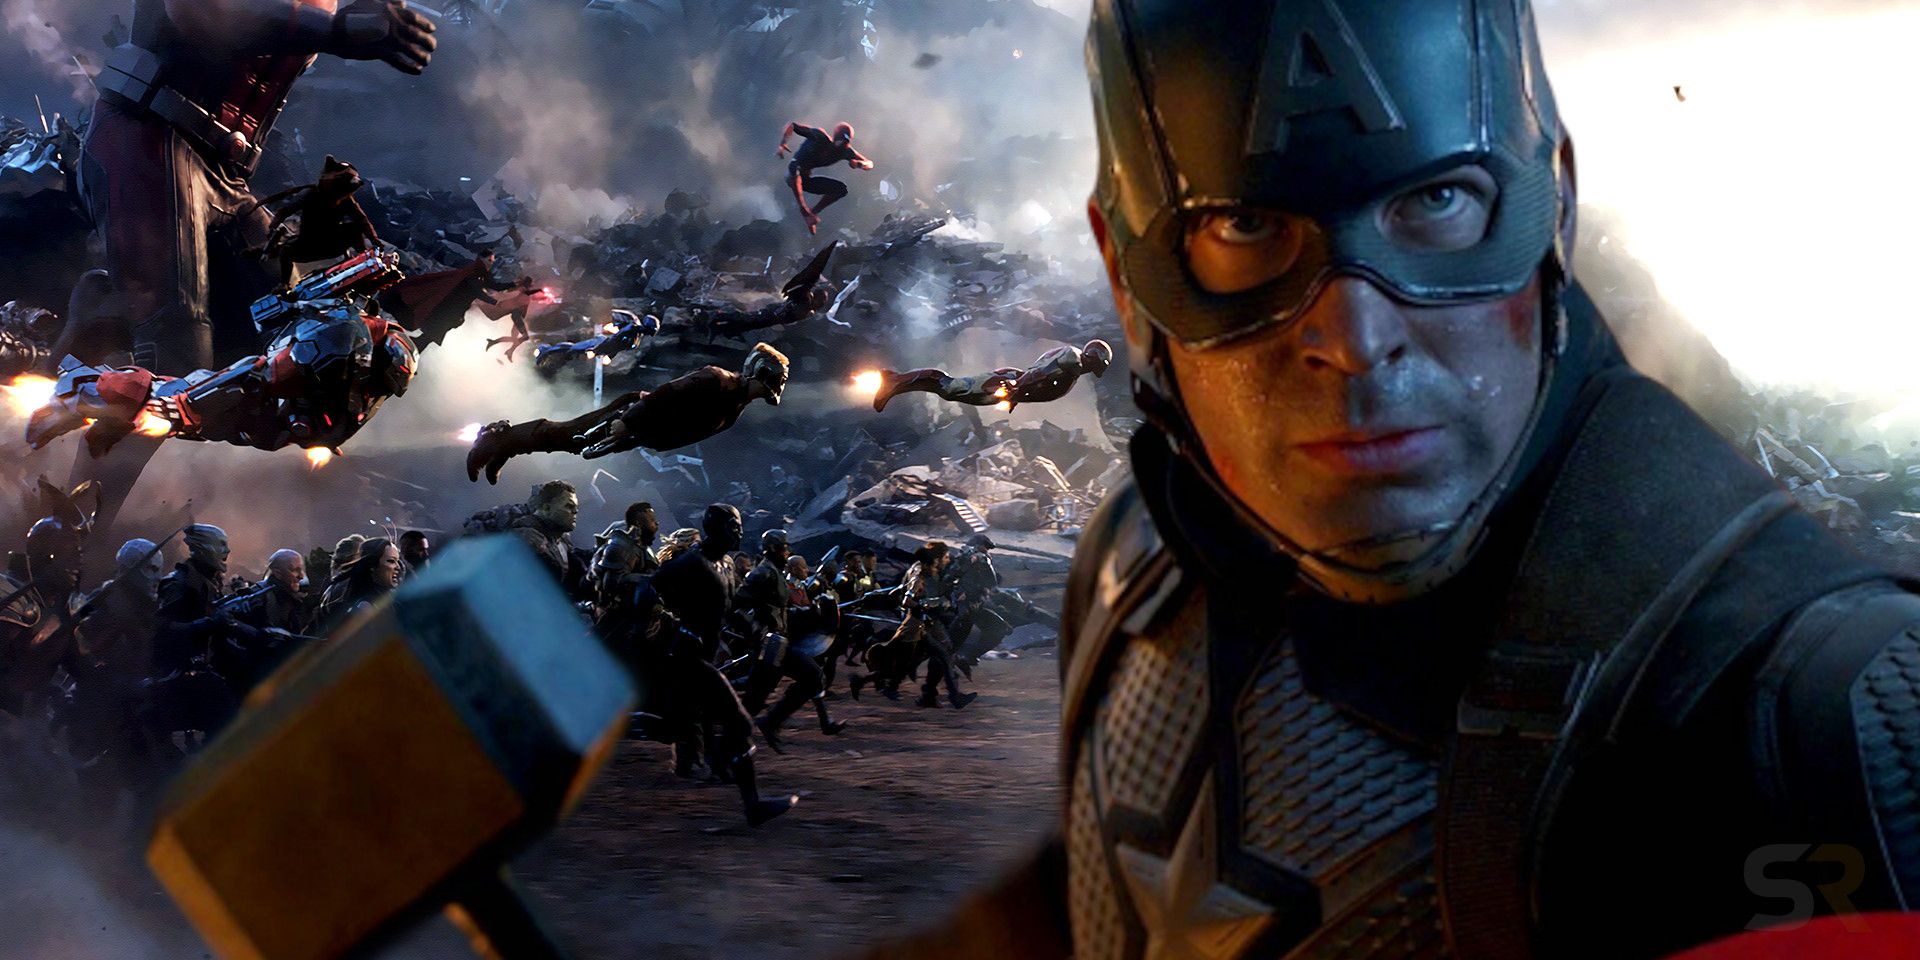 Why Captain America Doesn’t Say “Avengers Assemble” Until Endgame